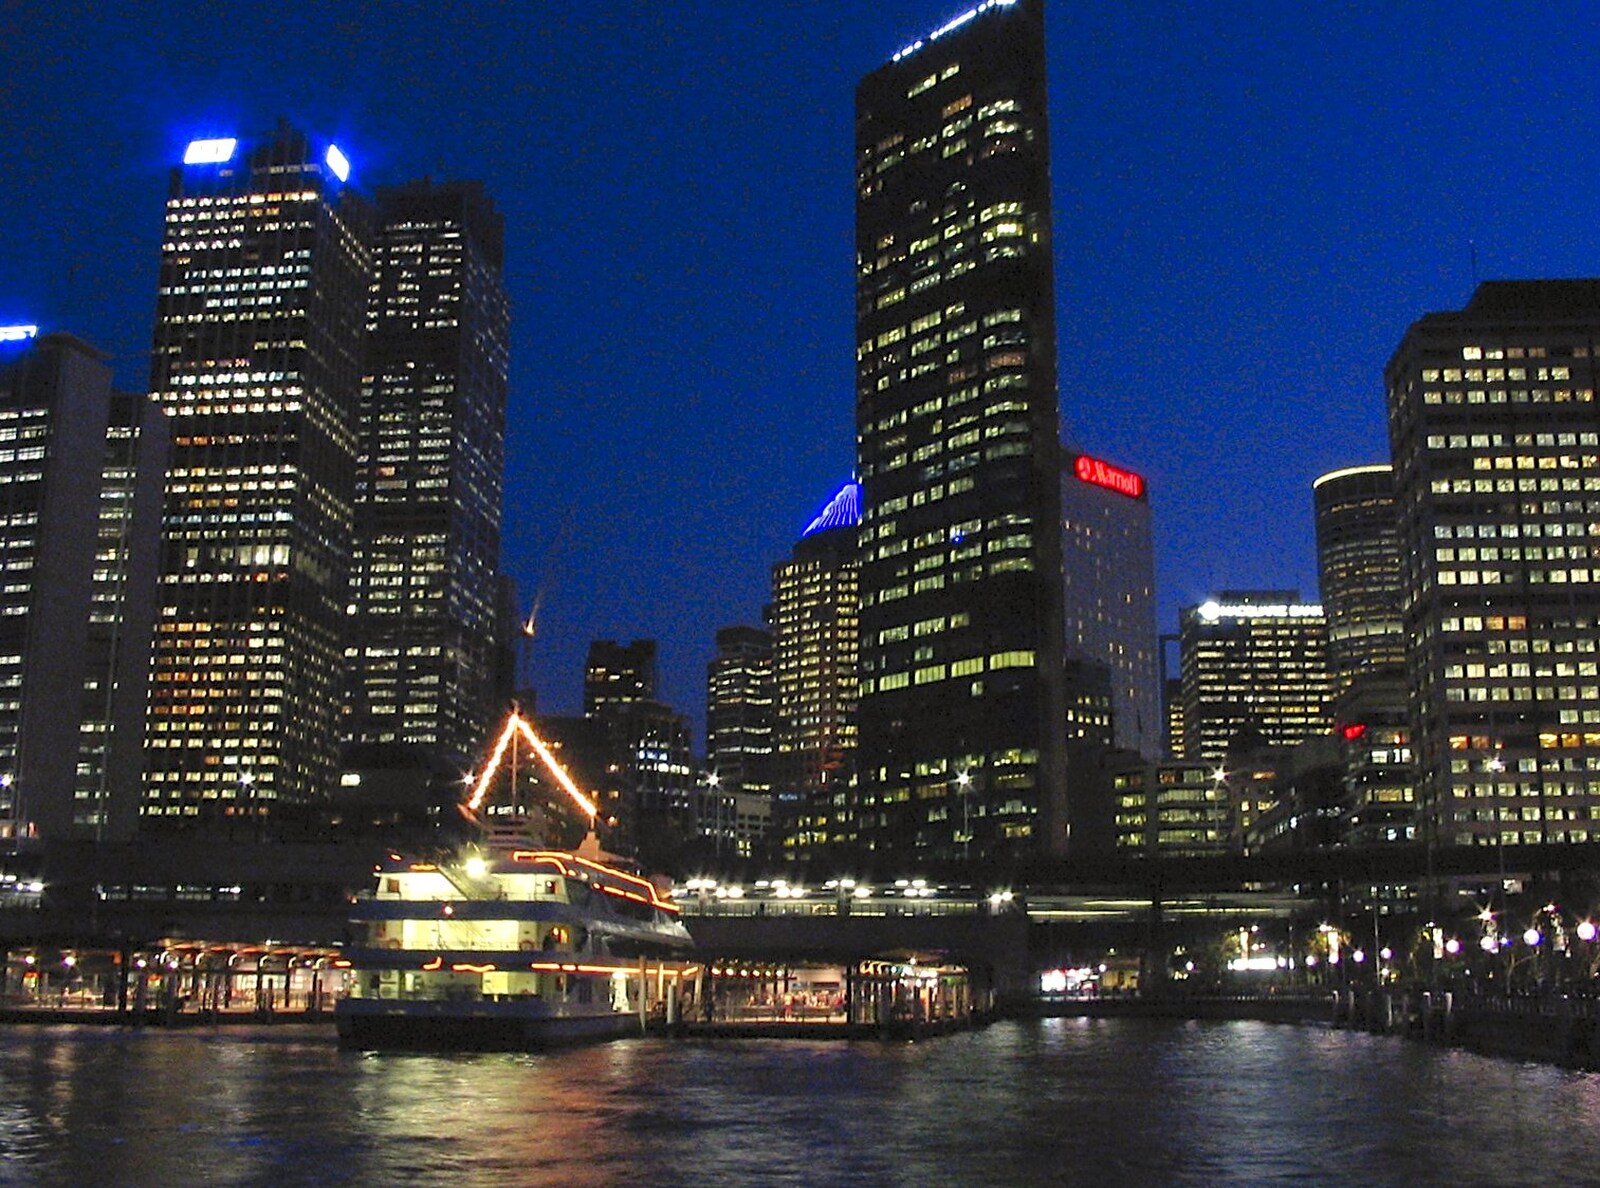 Circular Quay at night from Sydney, New South Wales, Australia - 10th October 2004